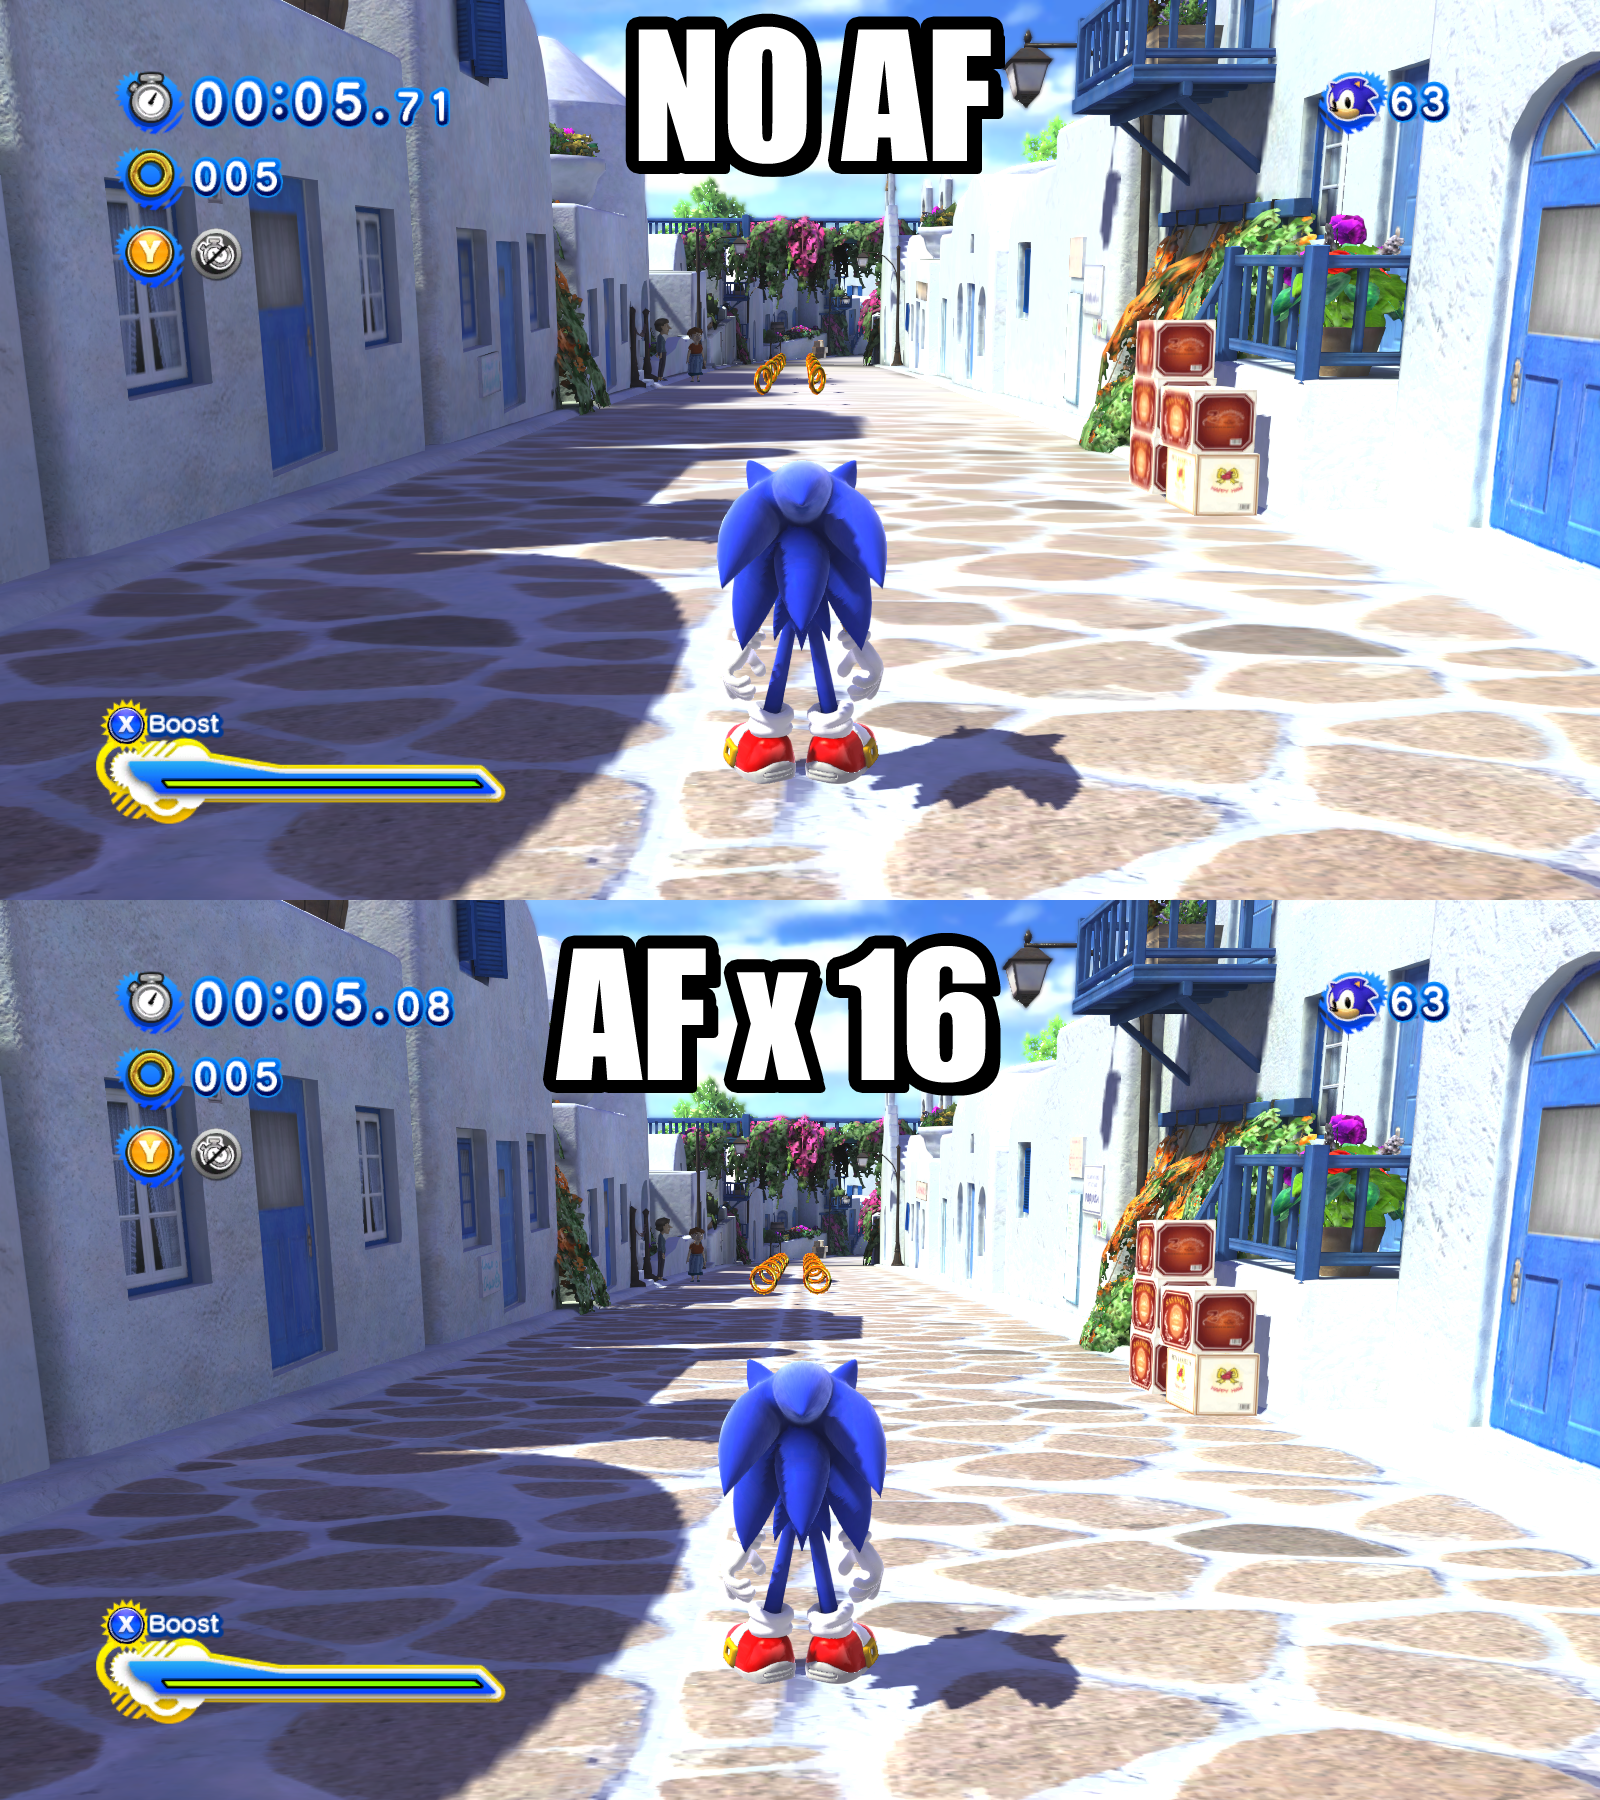 sonic unleashed for pc